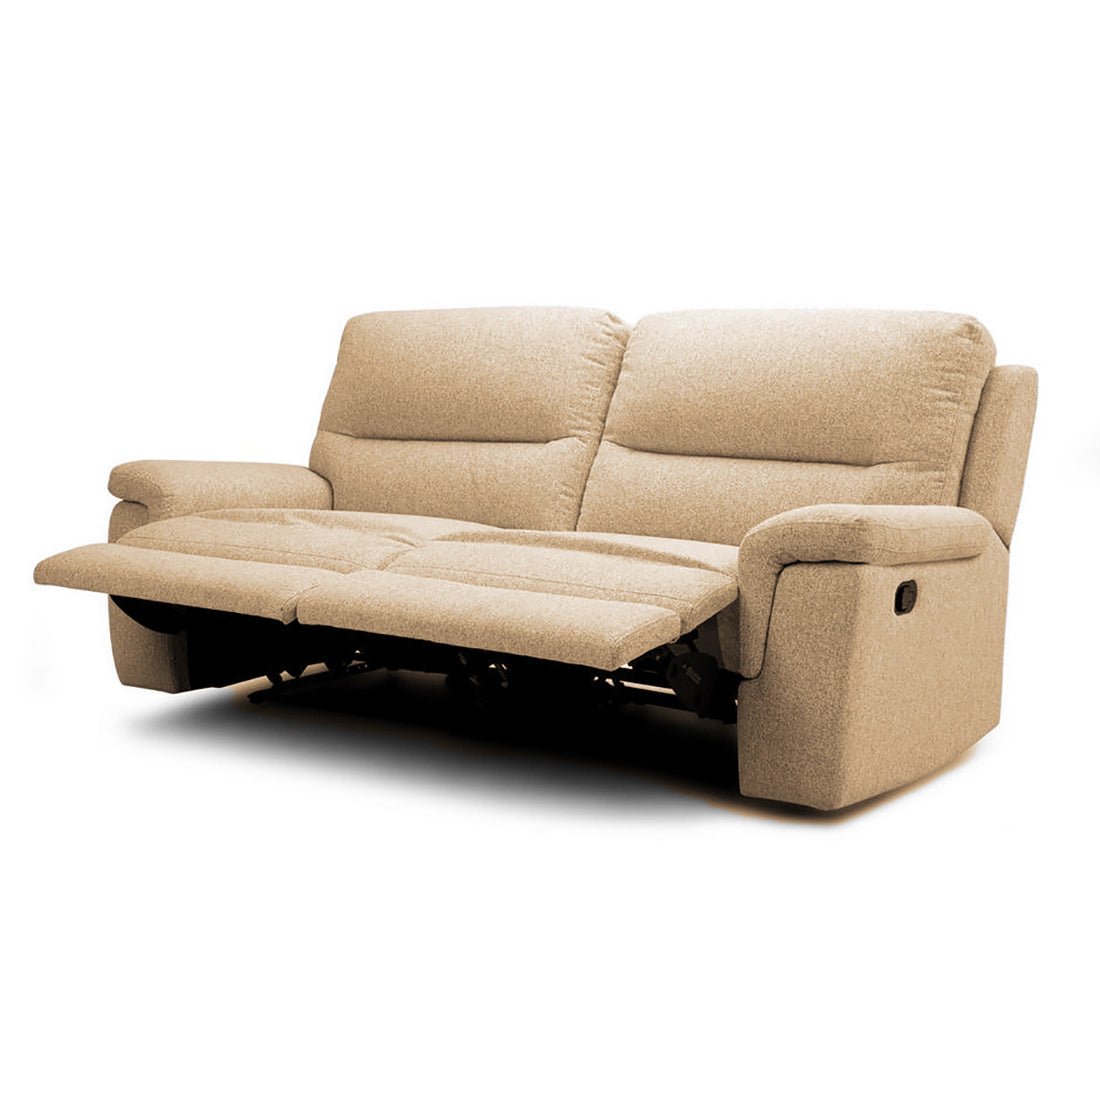 Easton 2 Seater Manual Recliner for Living Room and Bedroom - Torque India